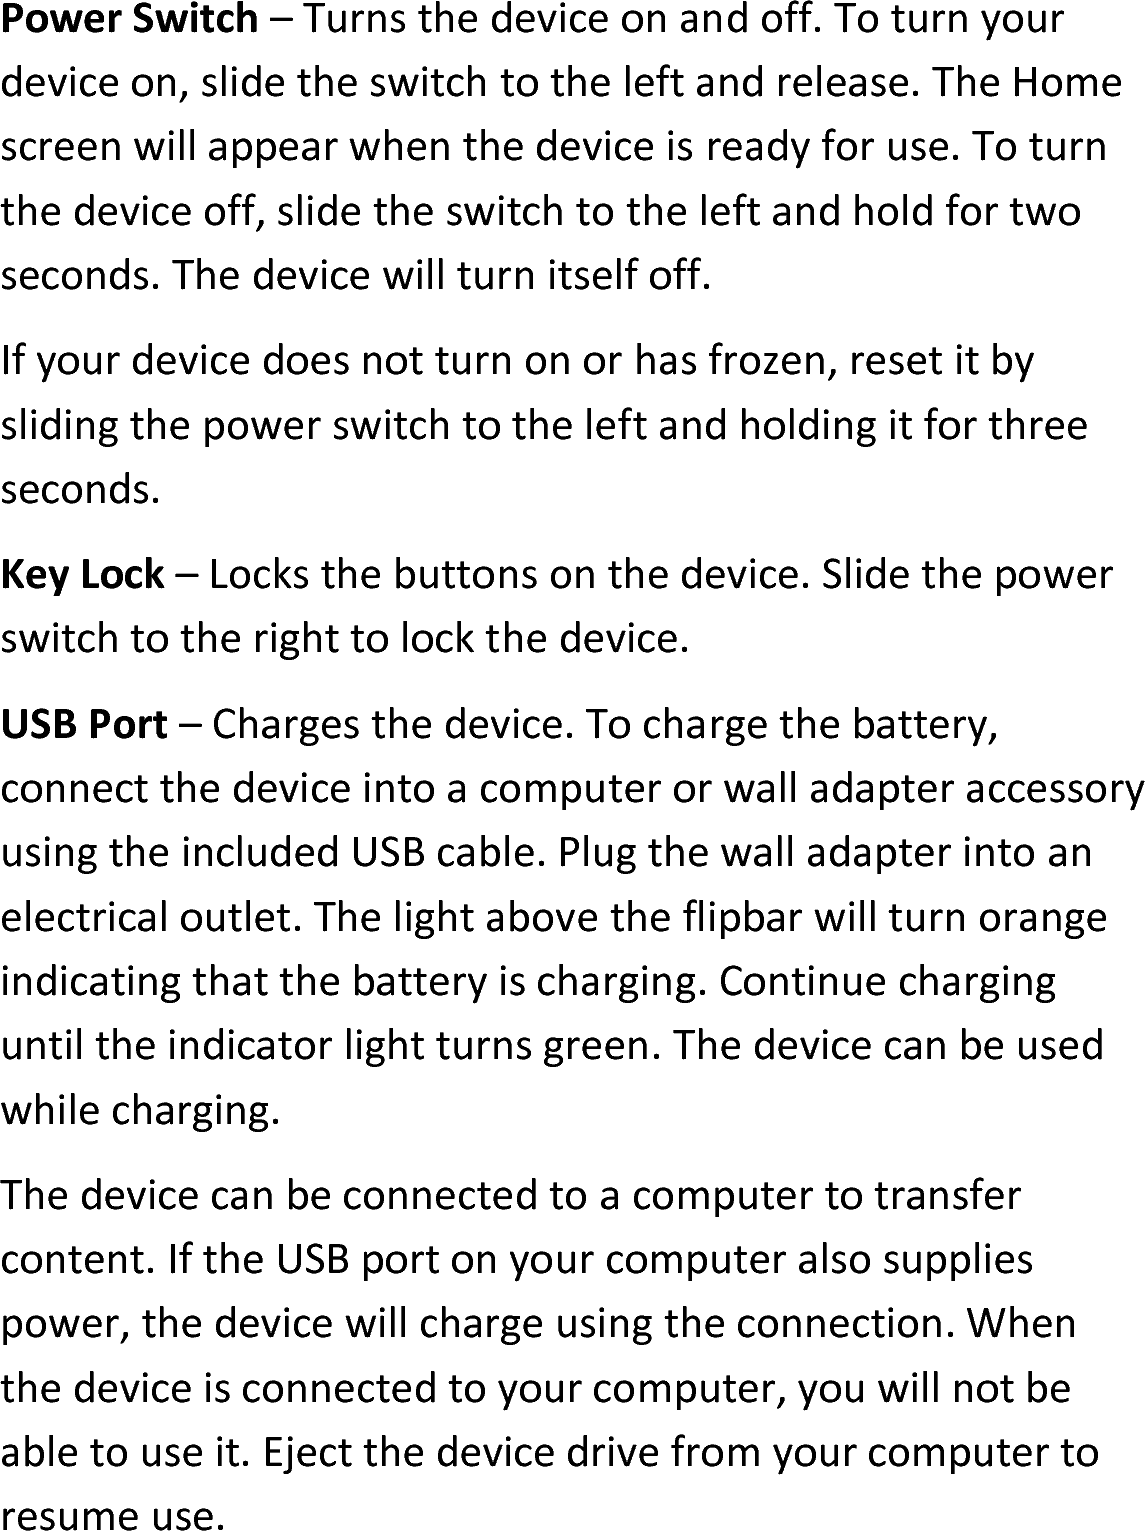 Power Switch – Turns the device on and off. To turn your device on, slide the switch to the left and release. The Home screen will appear when the device is ready for use. To turn the device off, slide the switch to the left and hold for two seconds. The device will turn itself off.If your device does not turn on or has frozen, reset it by sliding the power switch to the left and holding it for three seconds.Key Lock – Locks the buttons on the device. Slide the power switch to the right to lock the device.USB Port – Charges the device. To charge the battery, connect the device into a computer or wall adapter accessoryusing the included USB cable. Plug the wall adapter into an electrical outlet. The light above the flipbar will turn orange indicating that the battery is charging. Continue charging until the indicator light turns green. The device can be used while charging.The device can be connected to a computer to transfer content. If the USB port on your computer also supplies power, the device will charge using the connection. When the device is connected to your computer, you will not be able to use it. Eject the device drive from your computer to resume use.